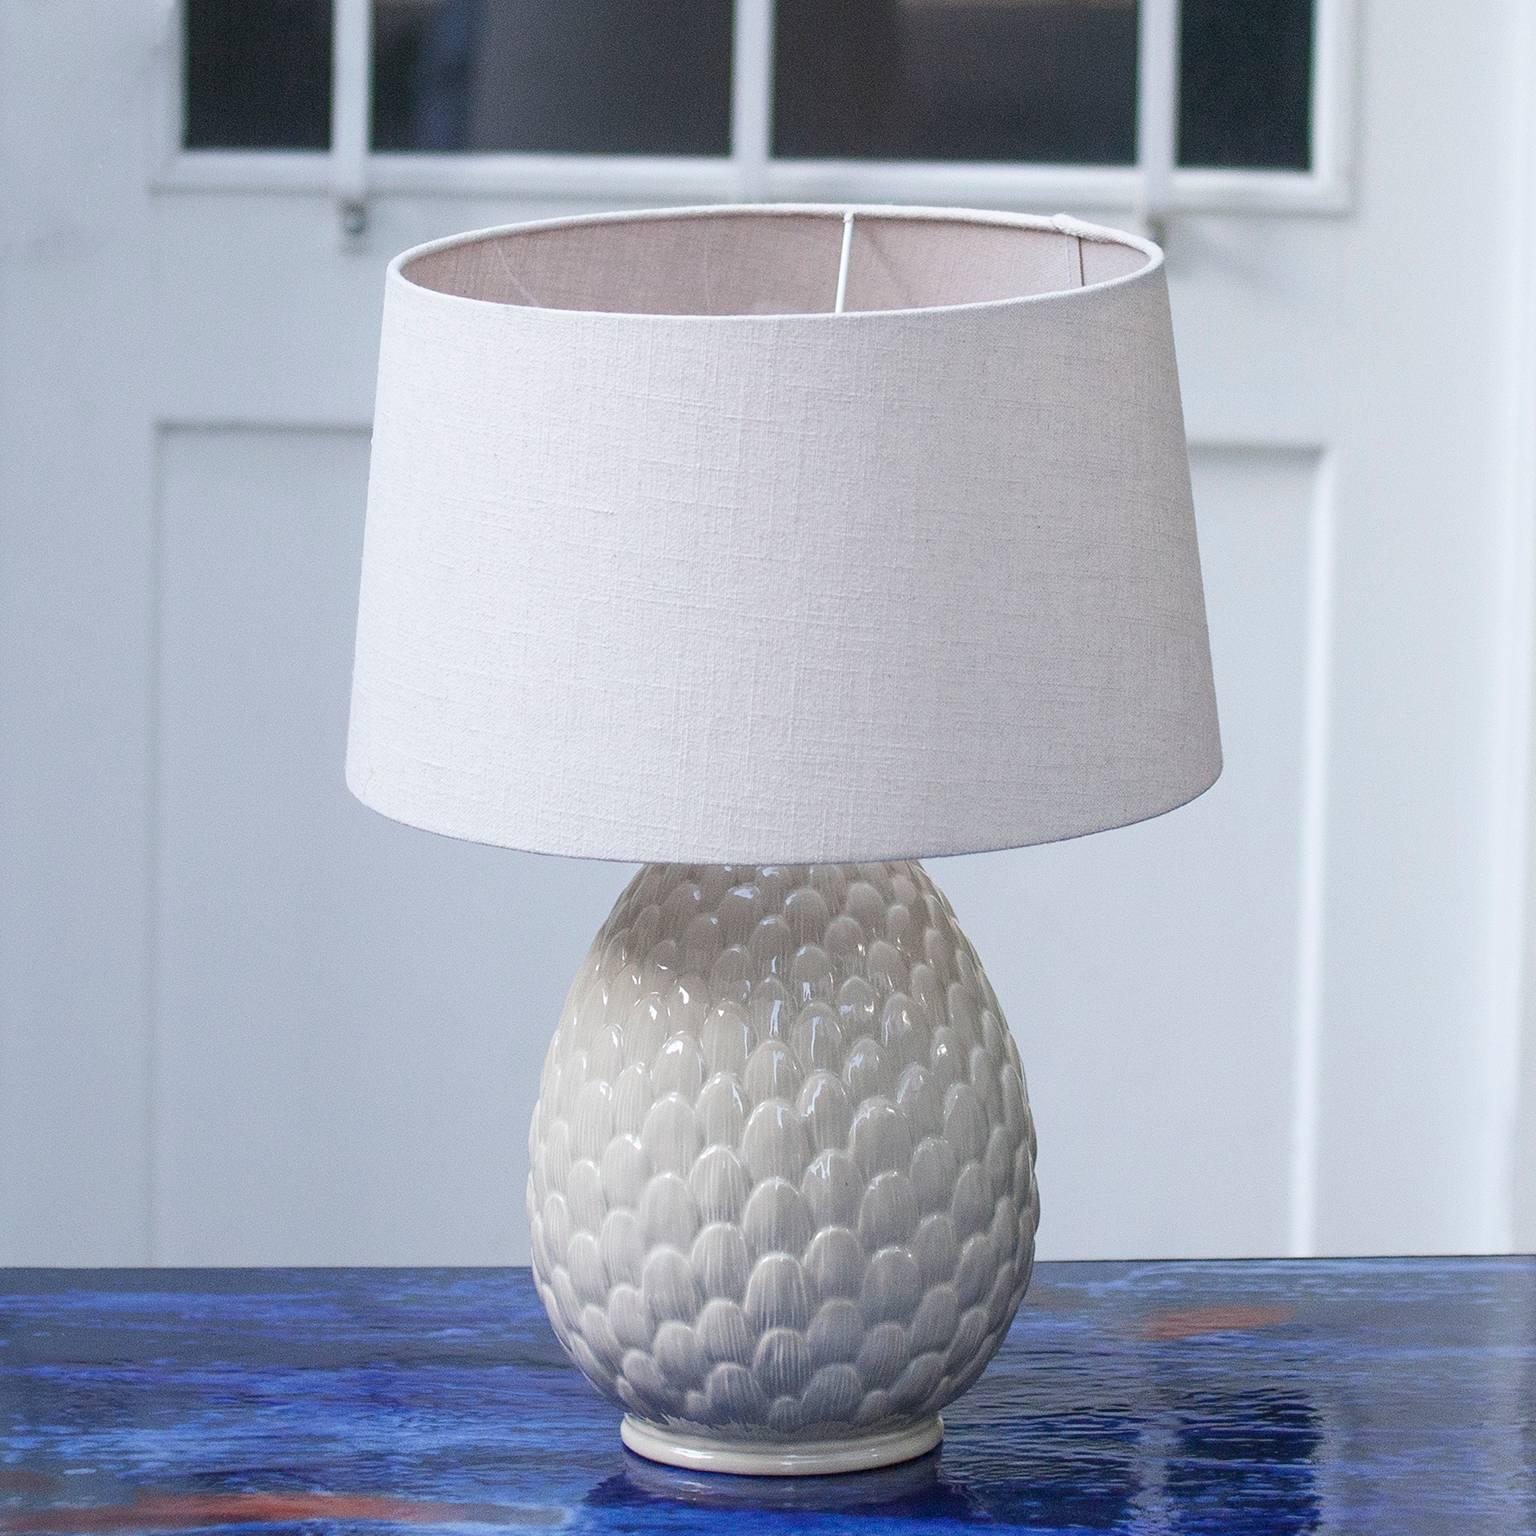 Elegant porcelain artichaut table lamp with cream fabric shade from Italy, 1970s.

Measure: H 57 x D 40 cm.